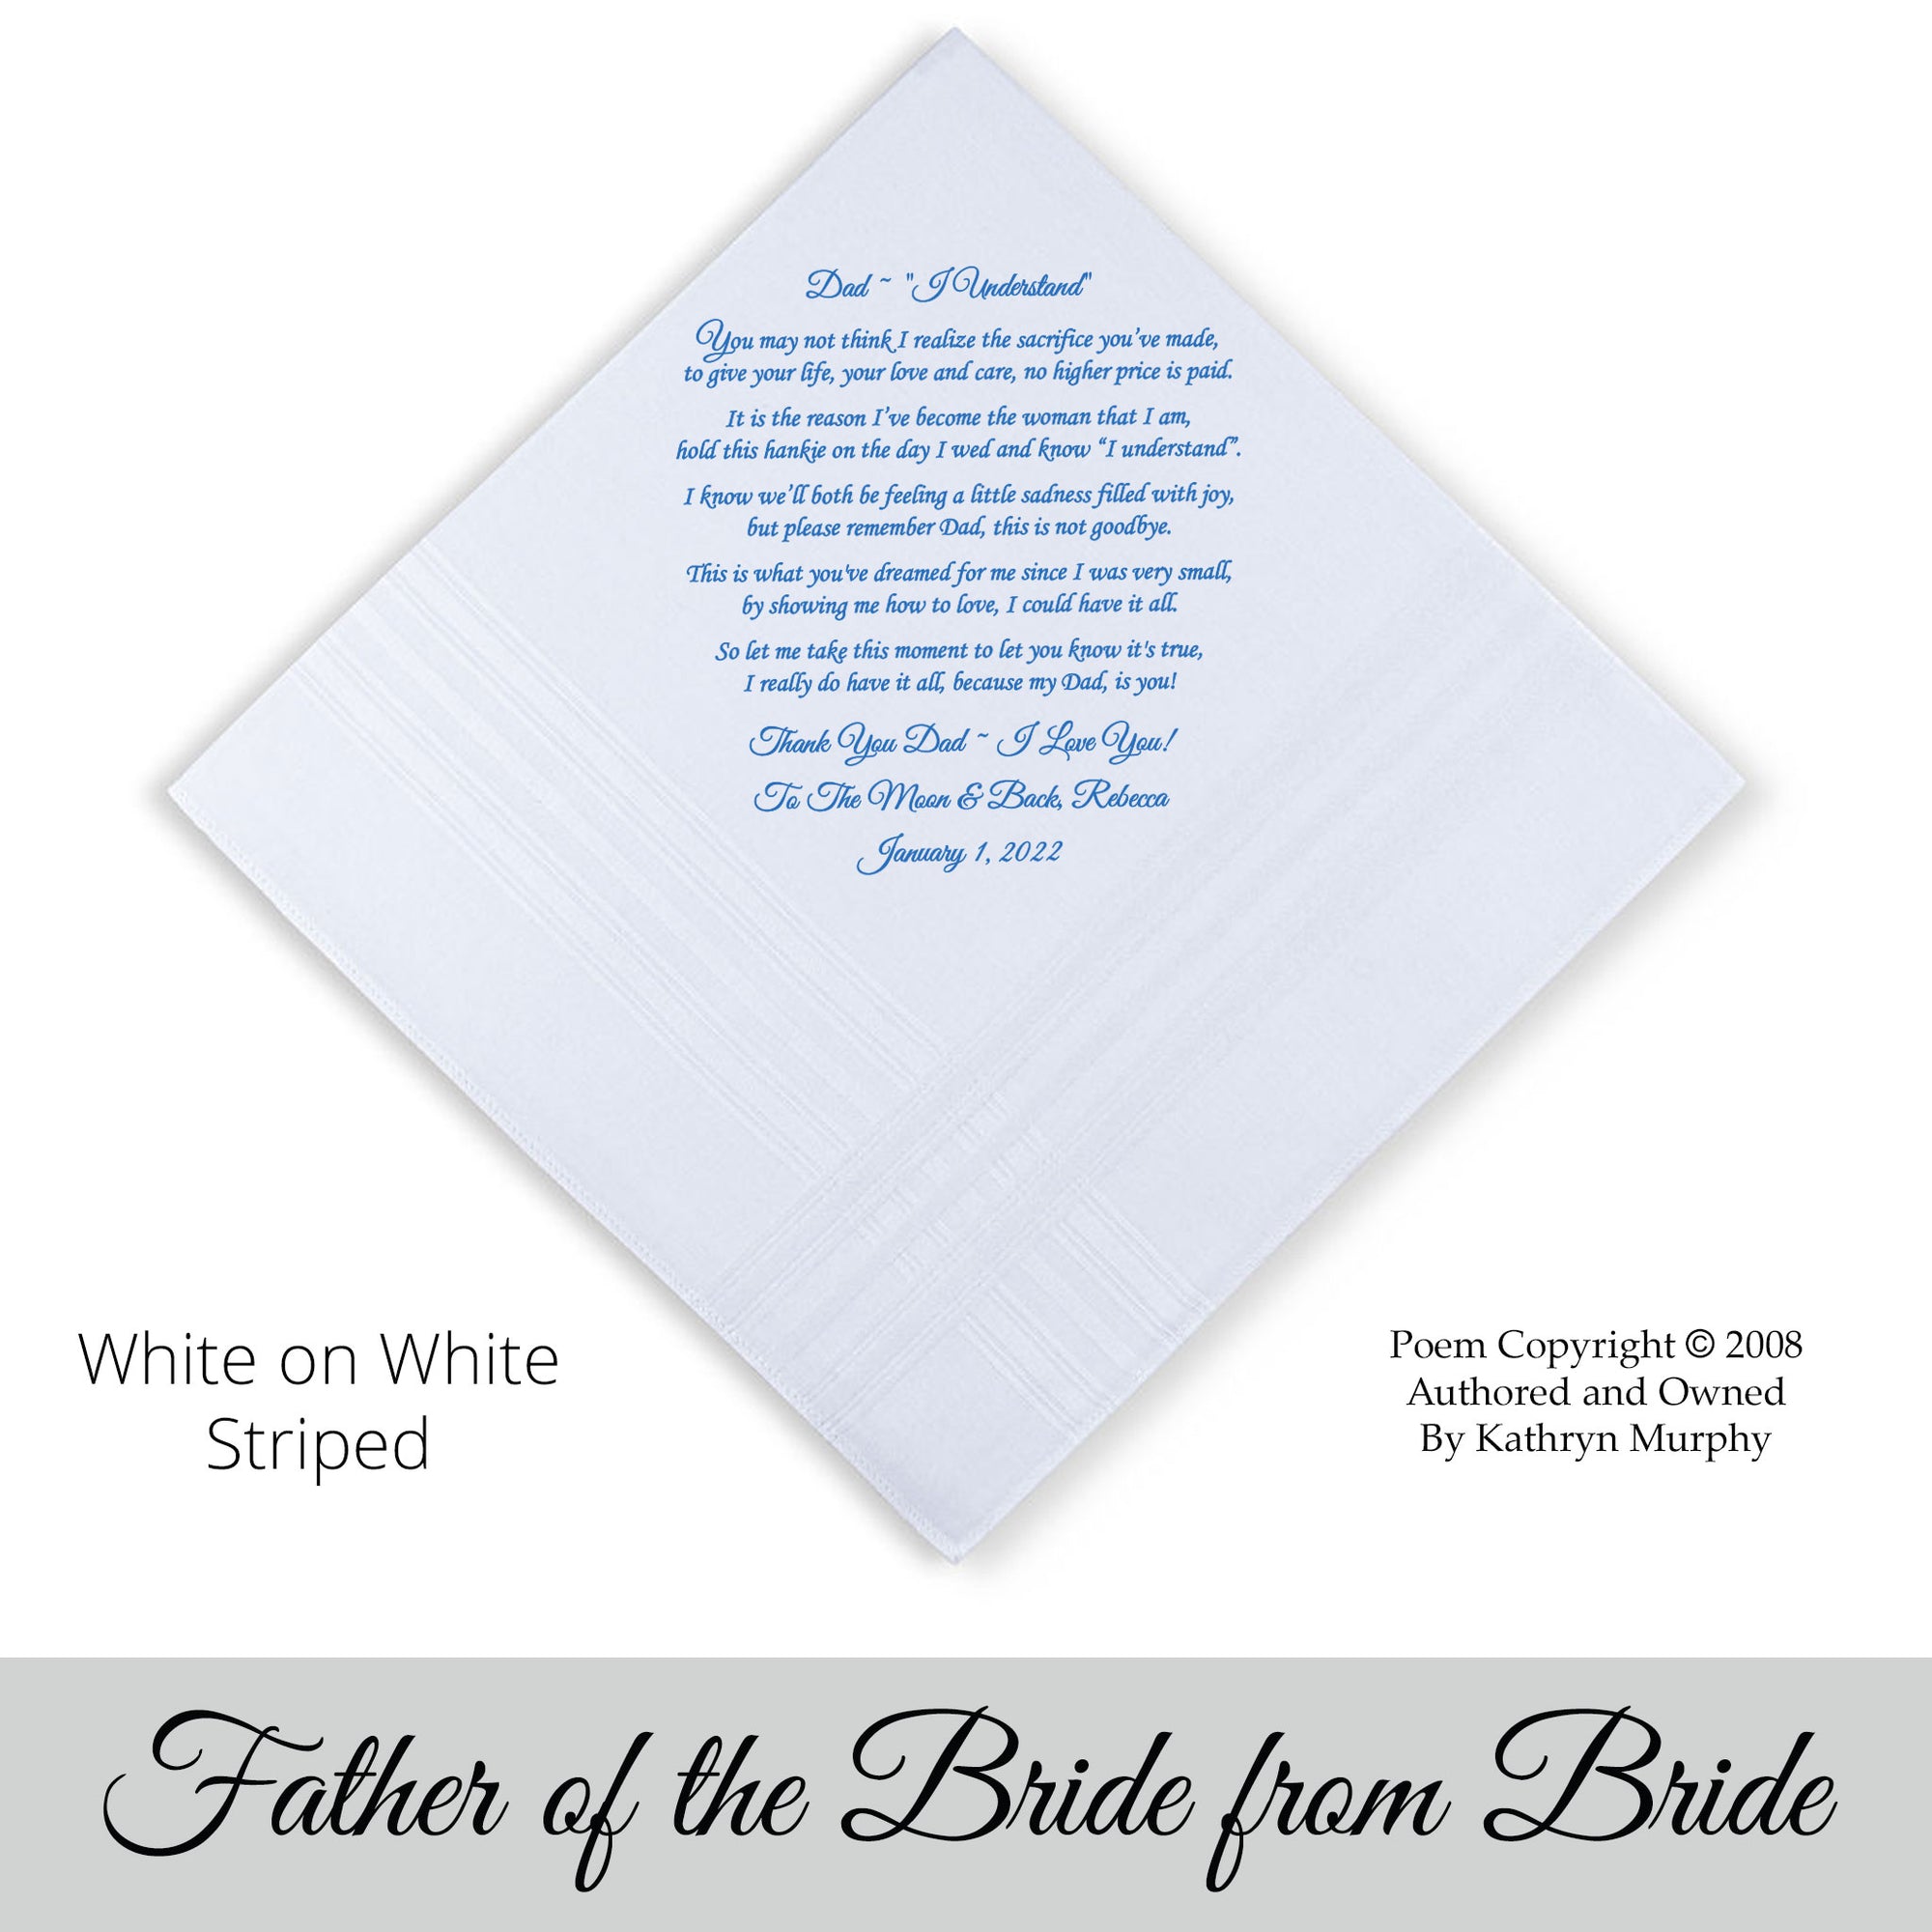 Father of the Bride Wedding Hankie with the poem "Dad I Understand"